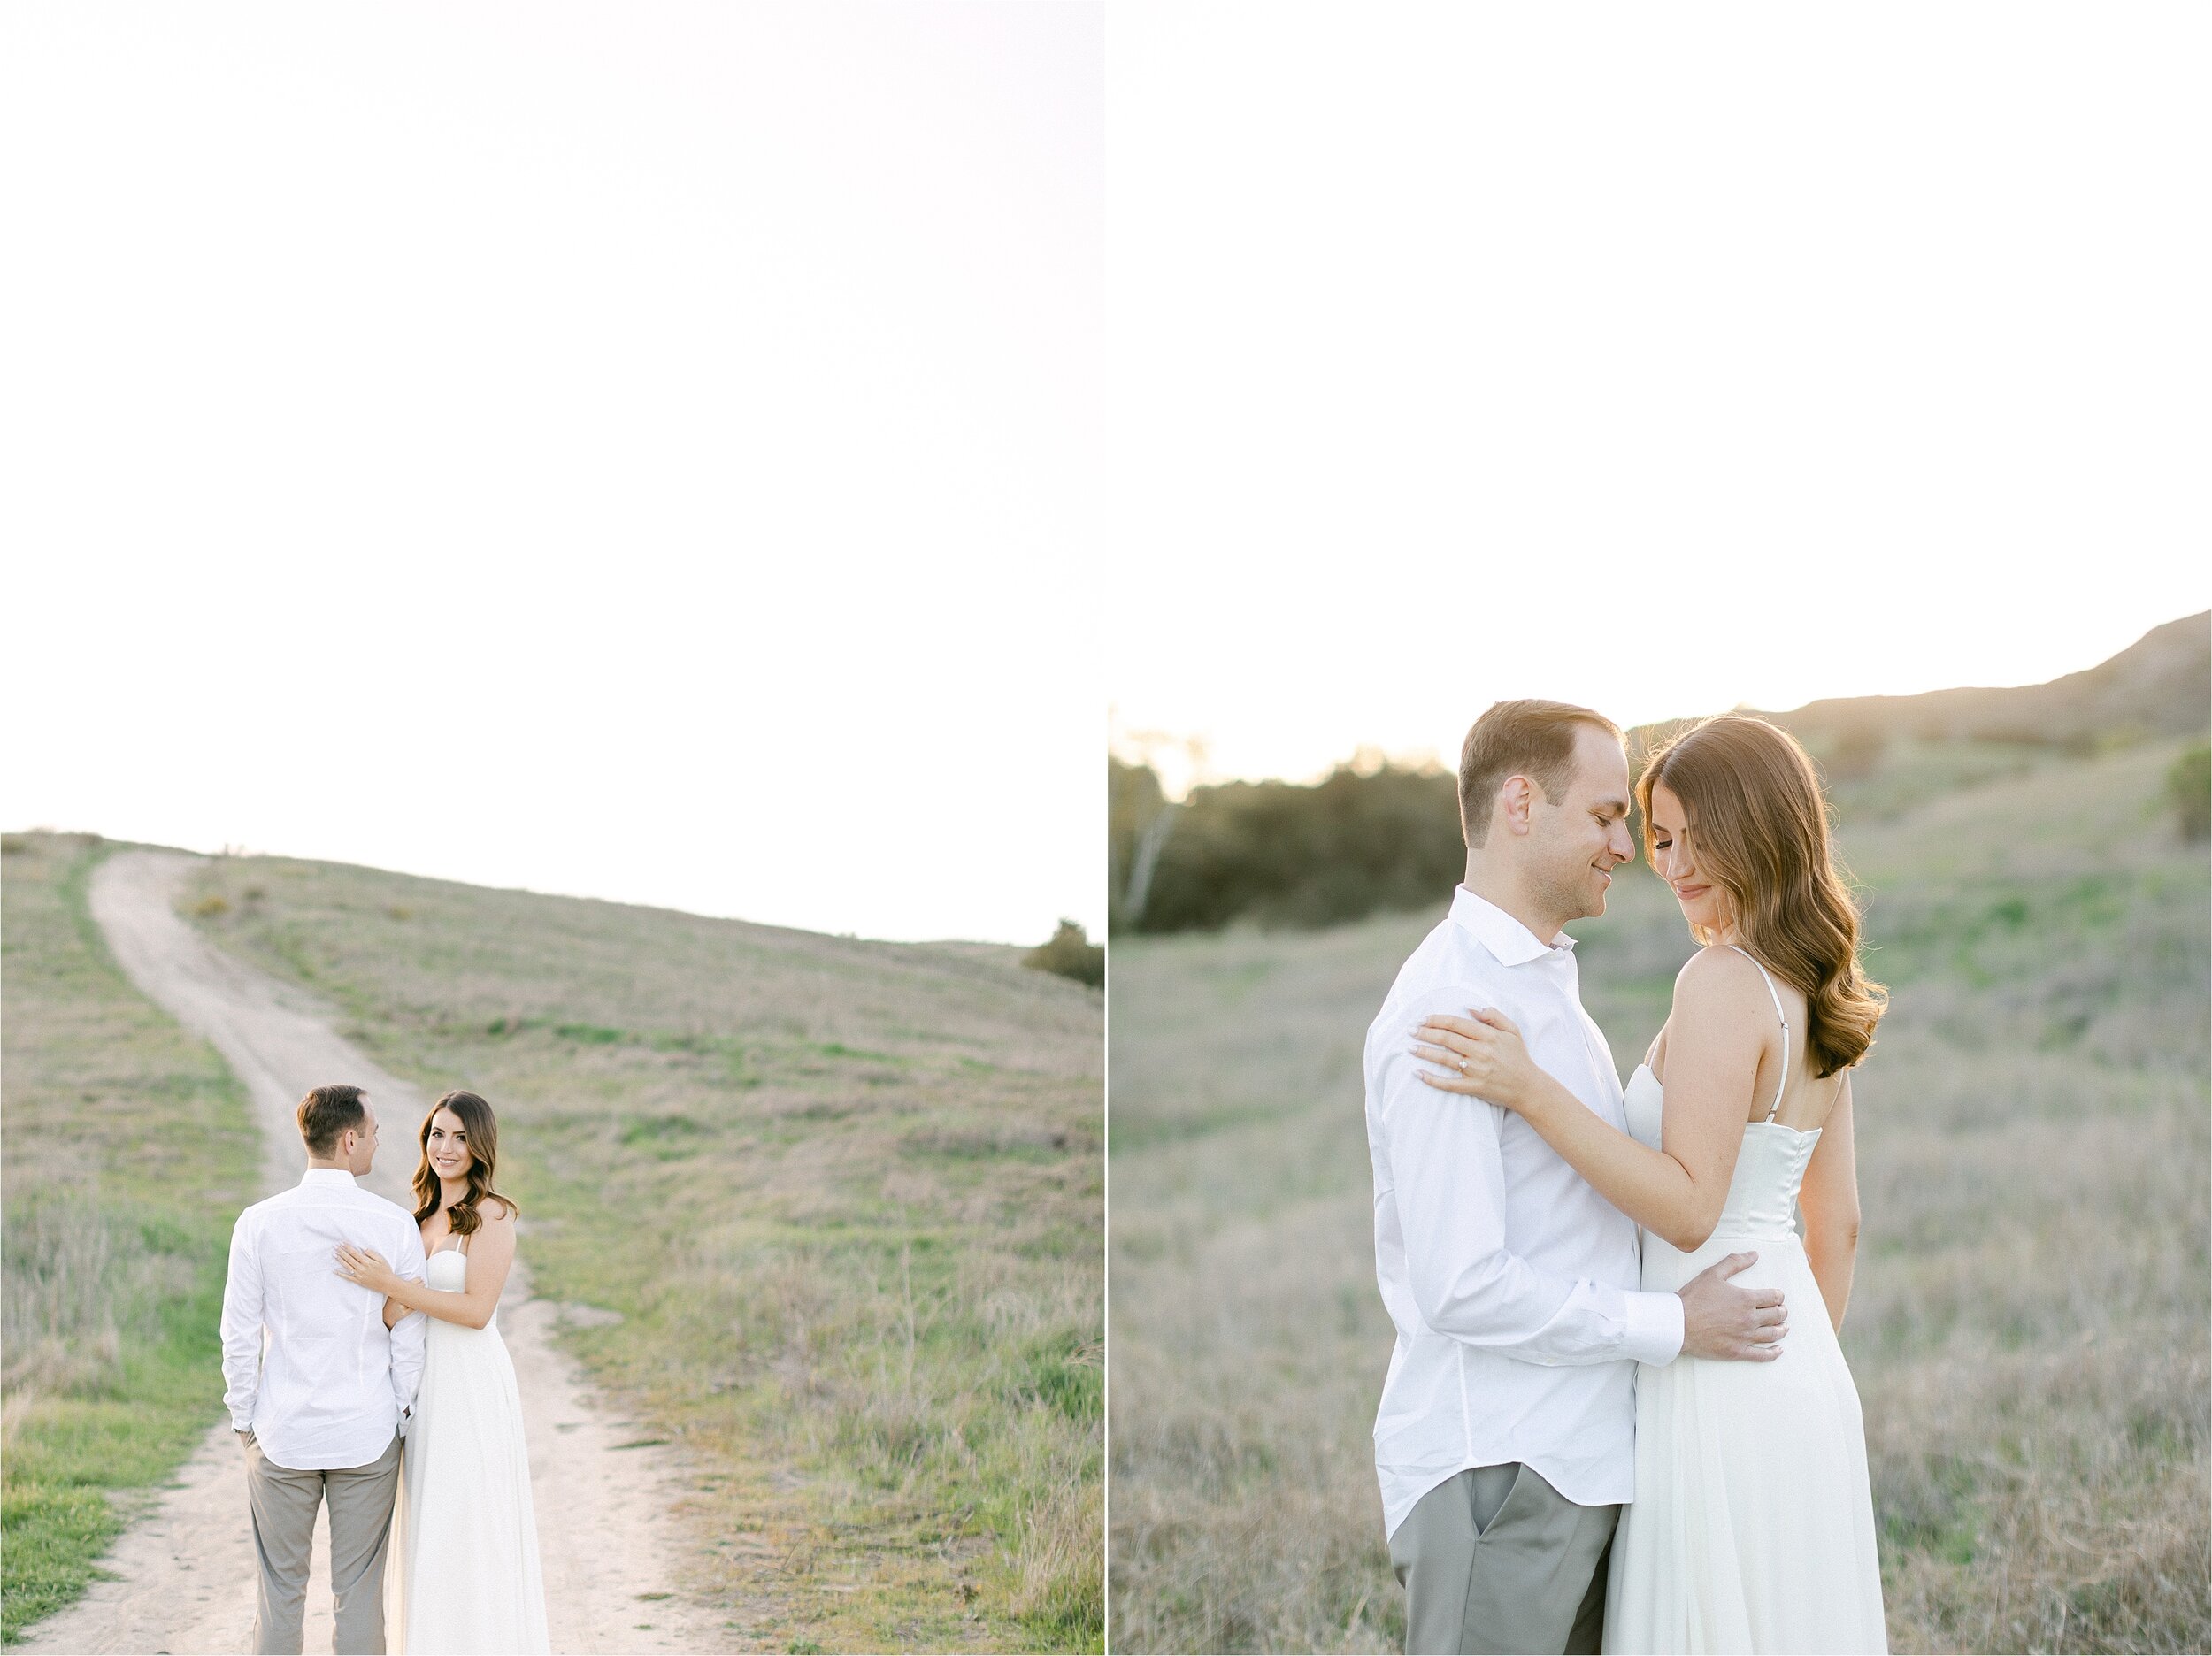 Male smiles at his bride-to-be during their hillside engagement photography session in Orange County, CA.